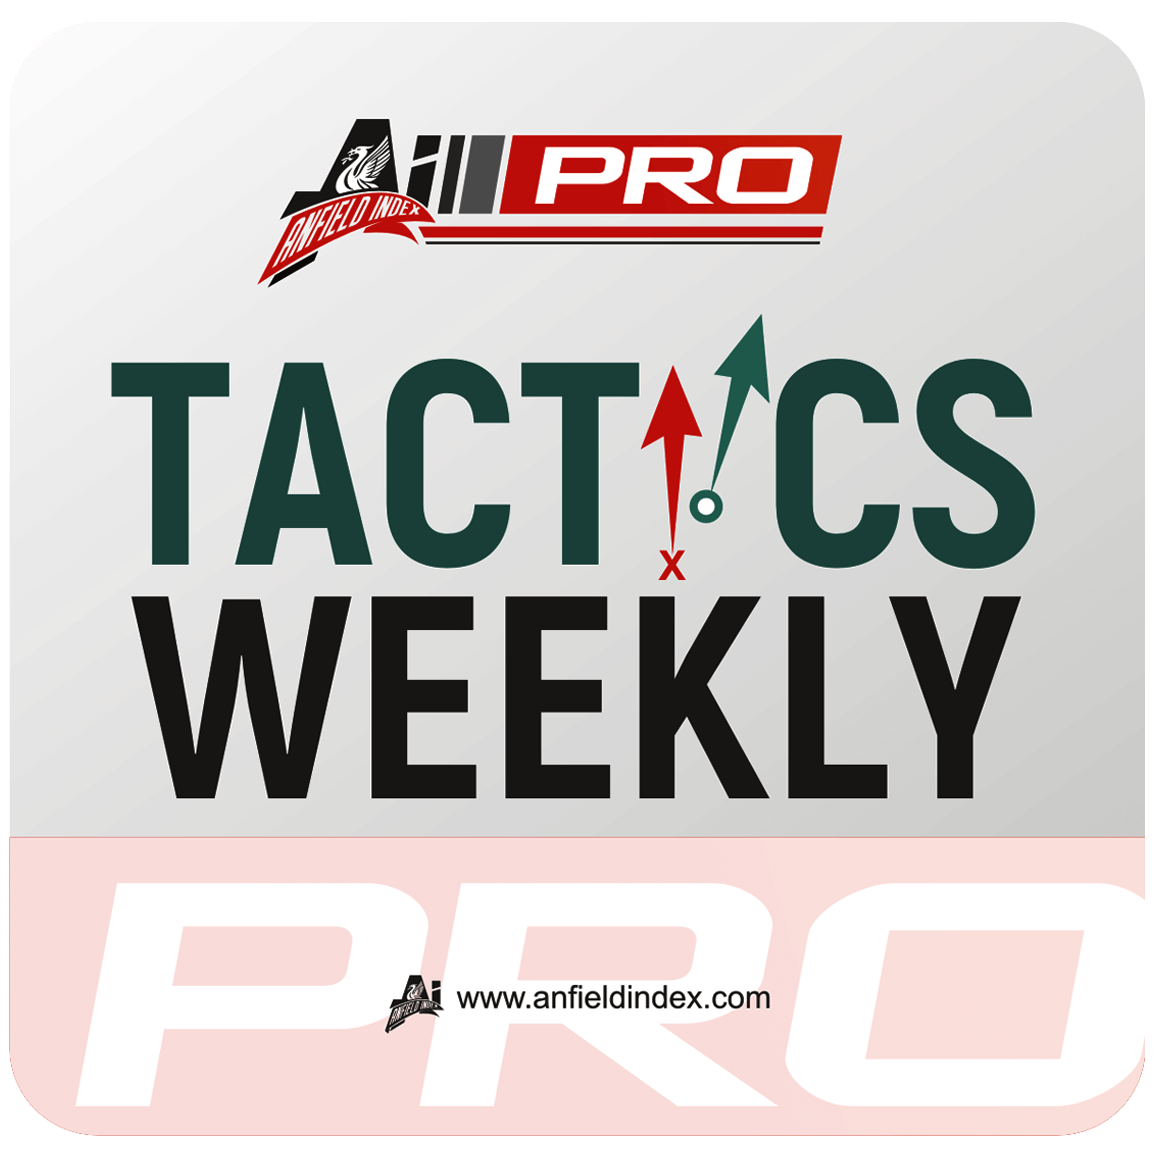 Tactics Weekly: Complete Tactical Dominance Earns Reds Victory Over United